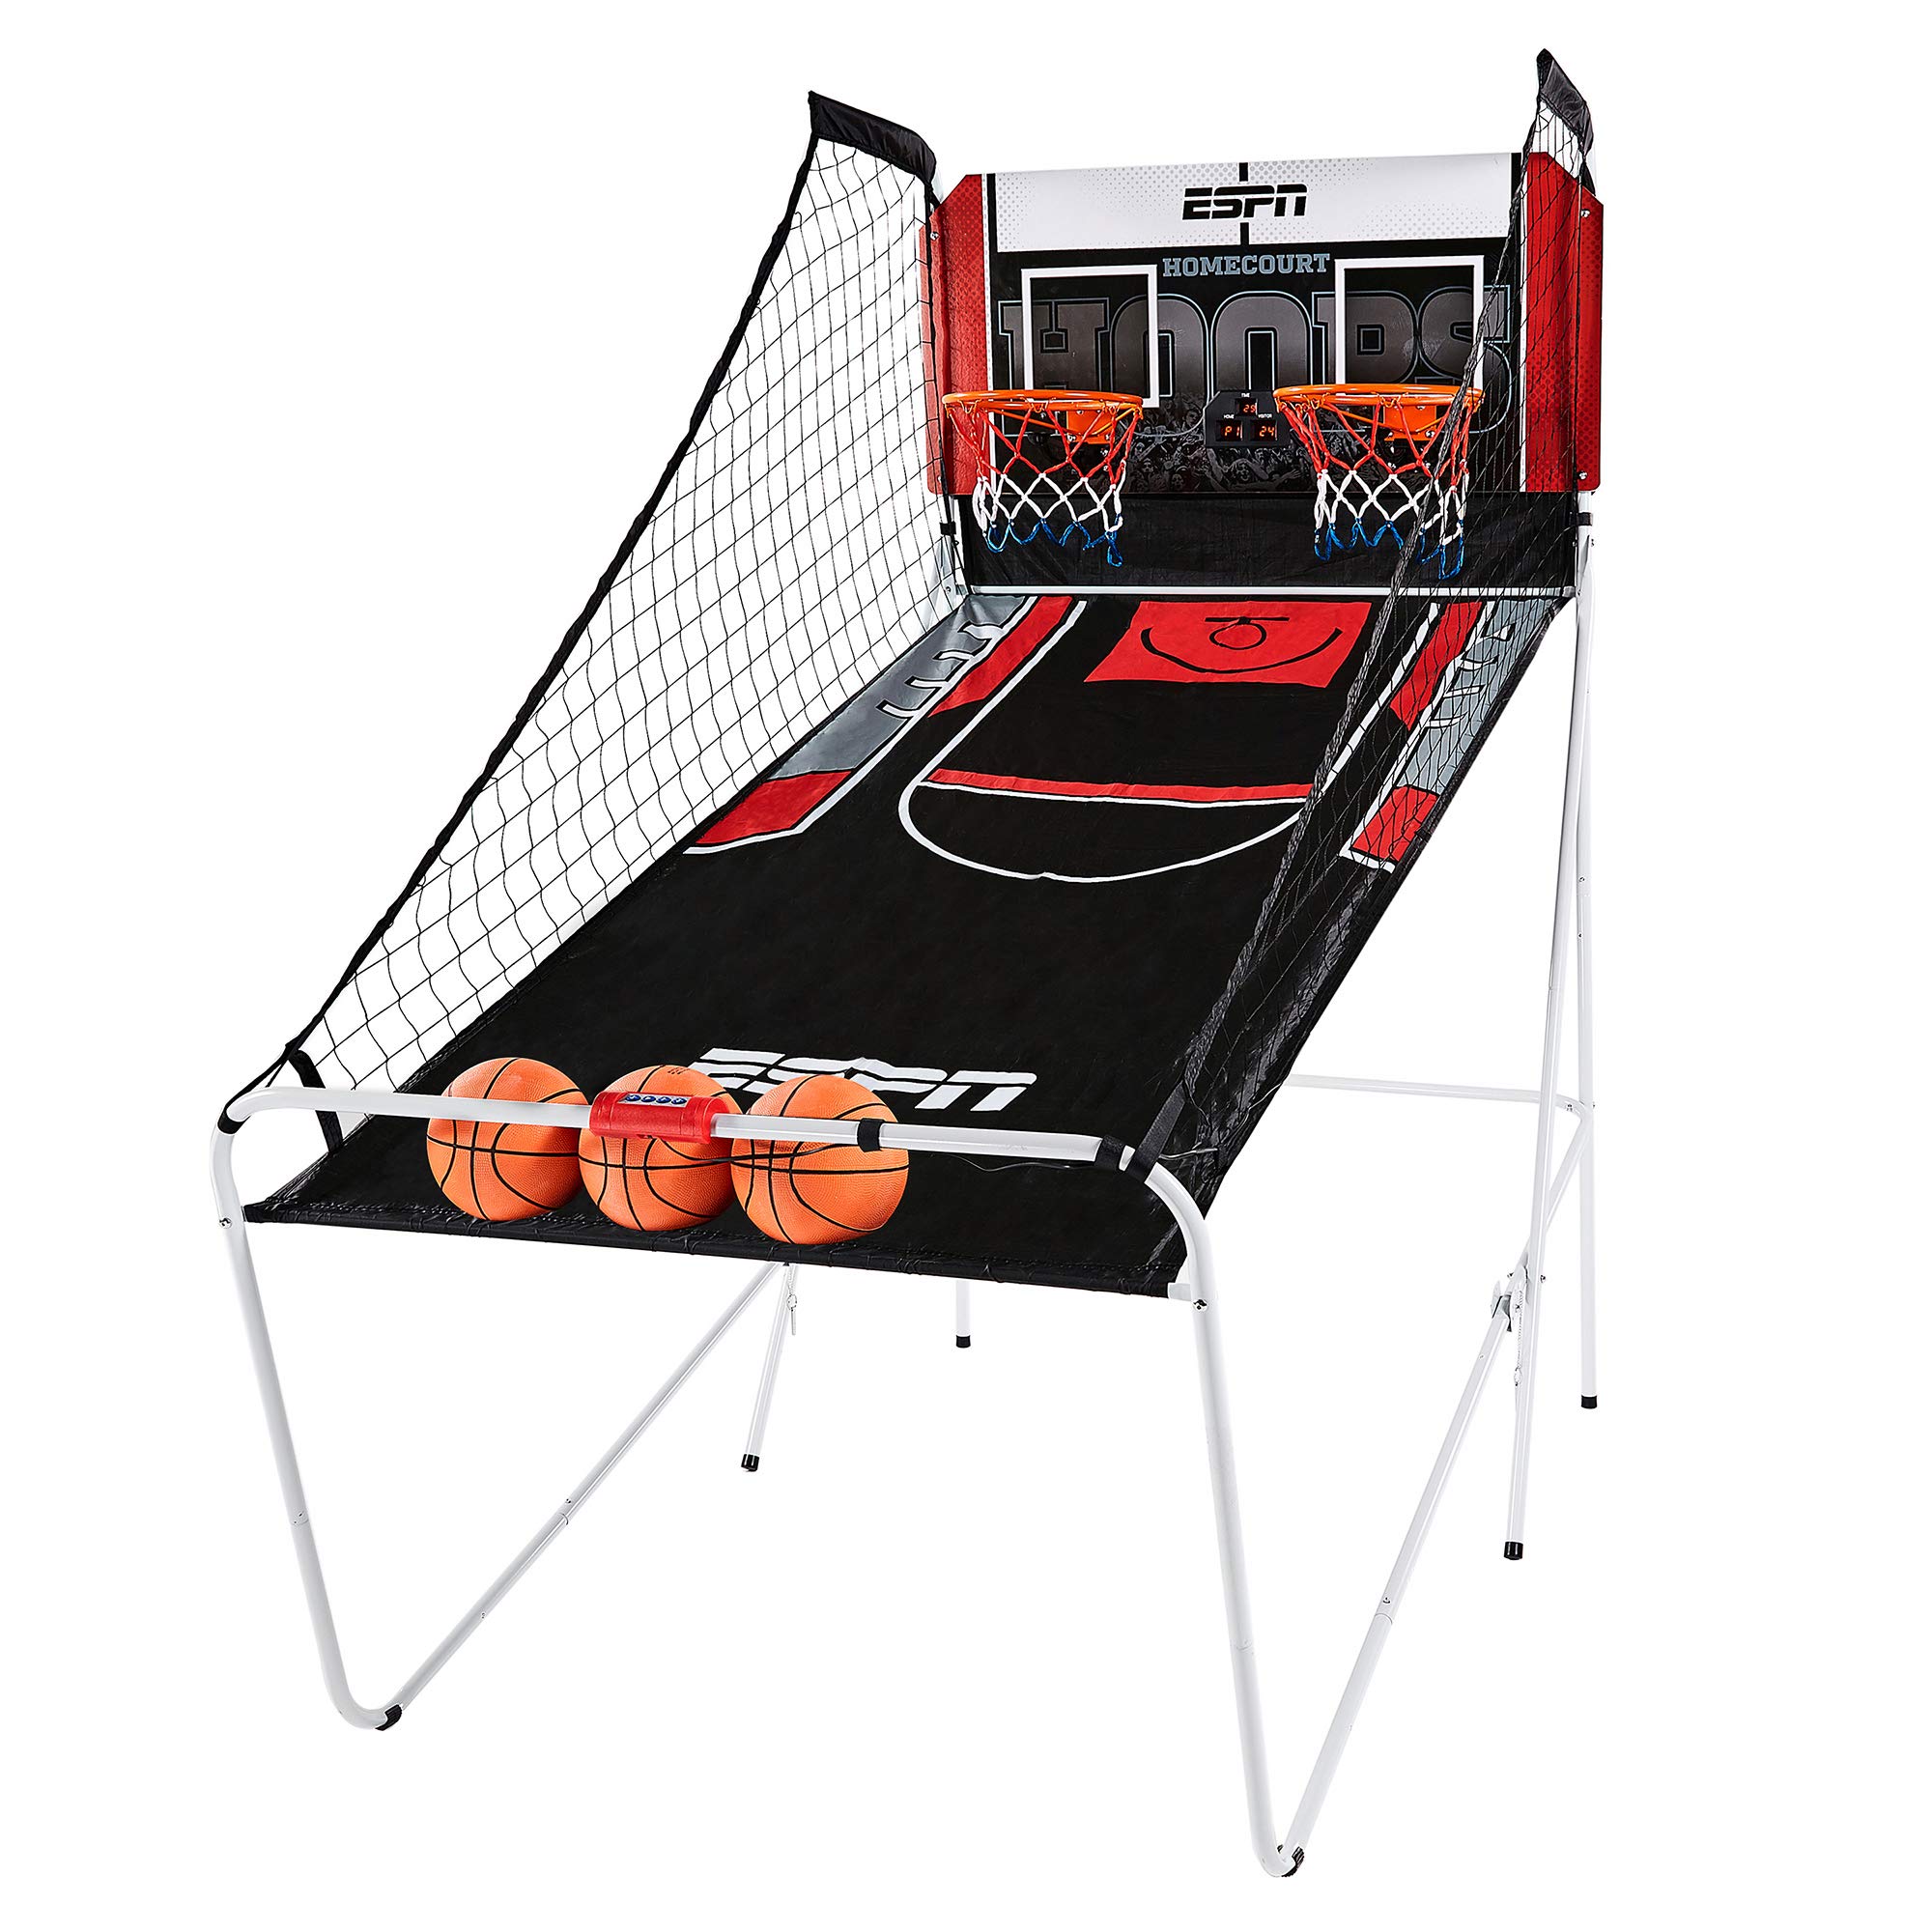 ESPN Indoor Home 2 Player Hoop Dual Shootout Basketball Arcade game with Preset games, LED Scoreboard, Side Netting, 3 Basketbal